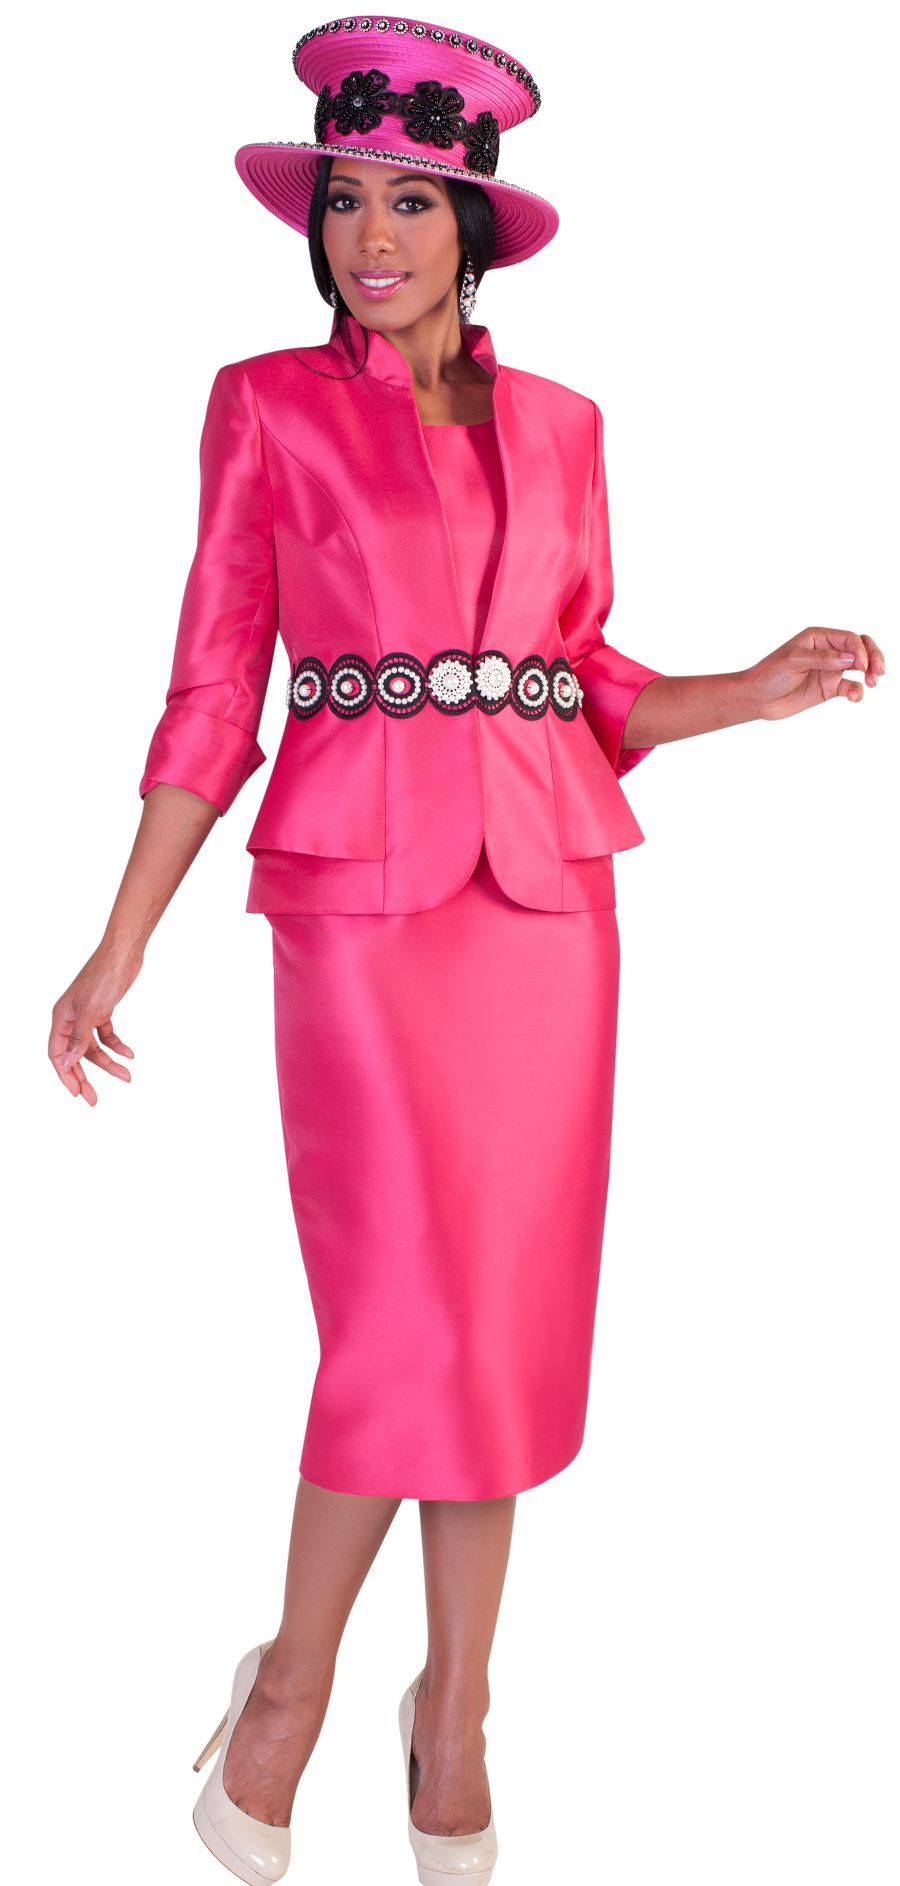 Tally Taylor Suit 4617C-Fuchsia/Black - Church Suits For Less